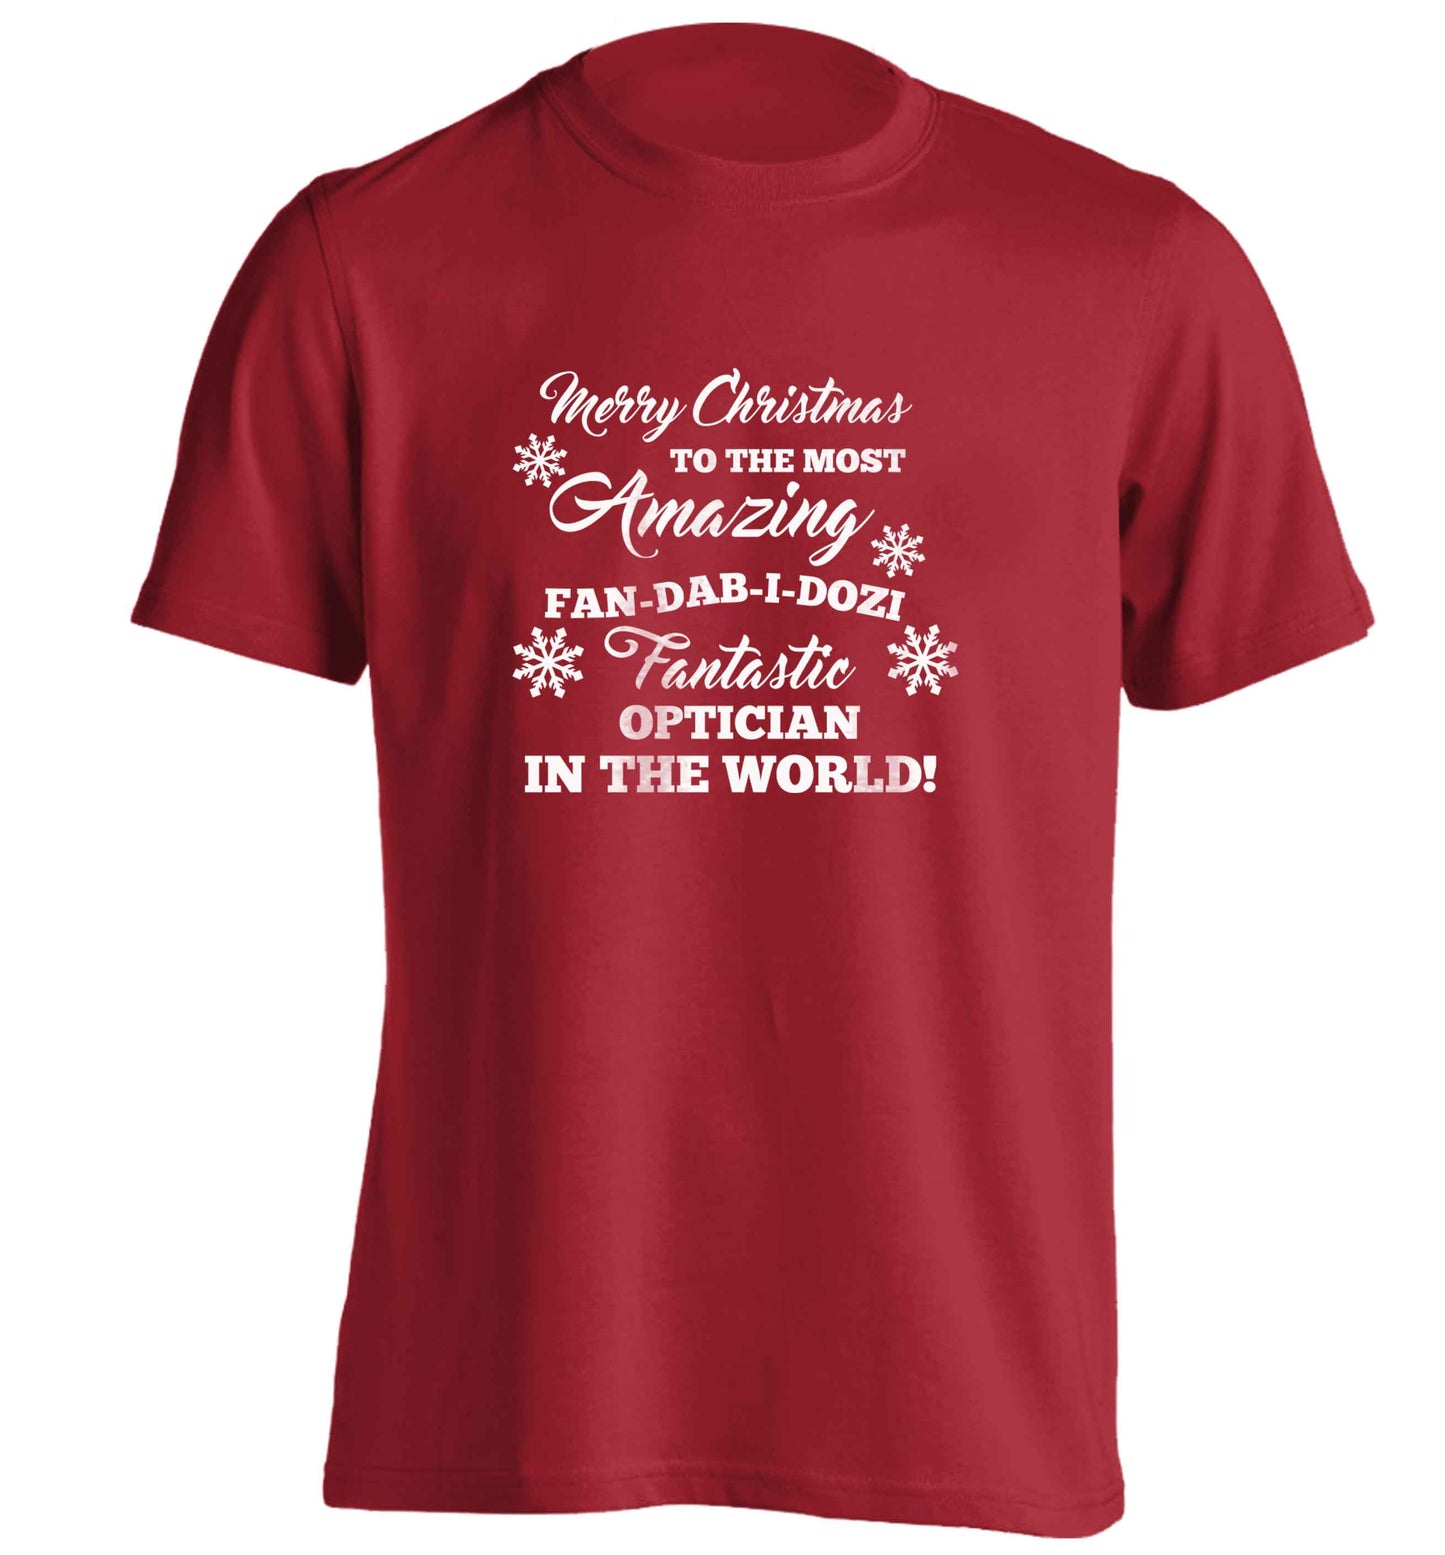 Merry Christmas to the most amazing optician in the world! adults unisex red Tshirt 2XL